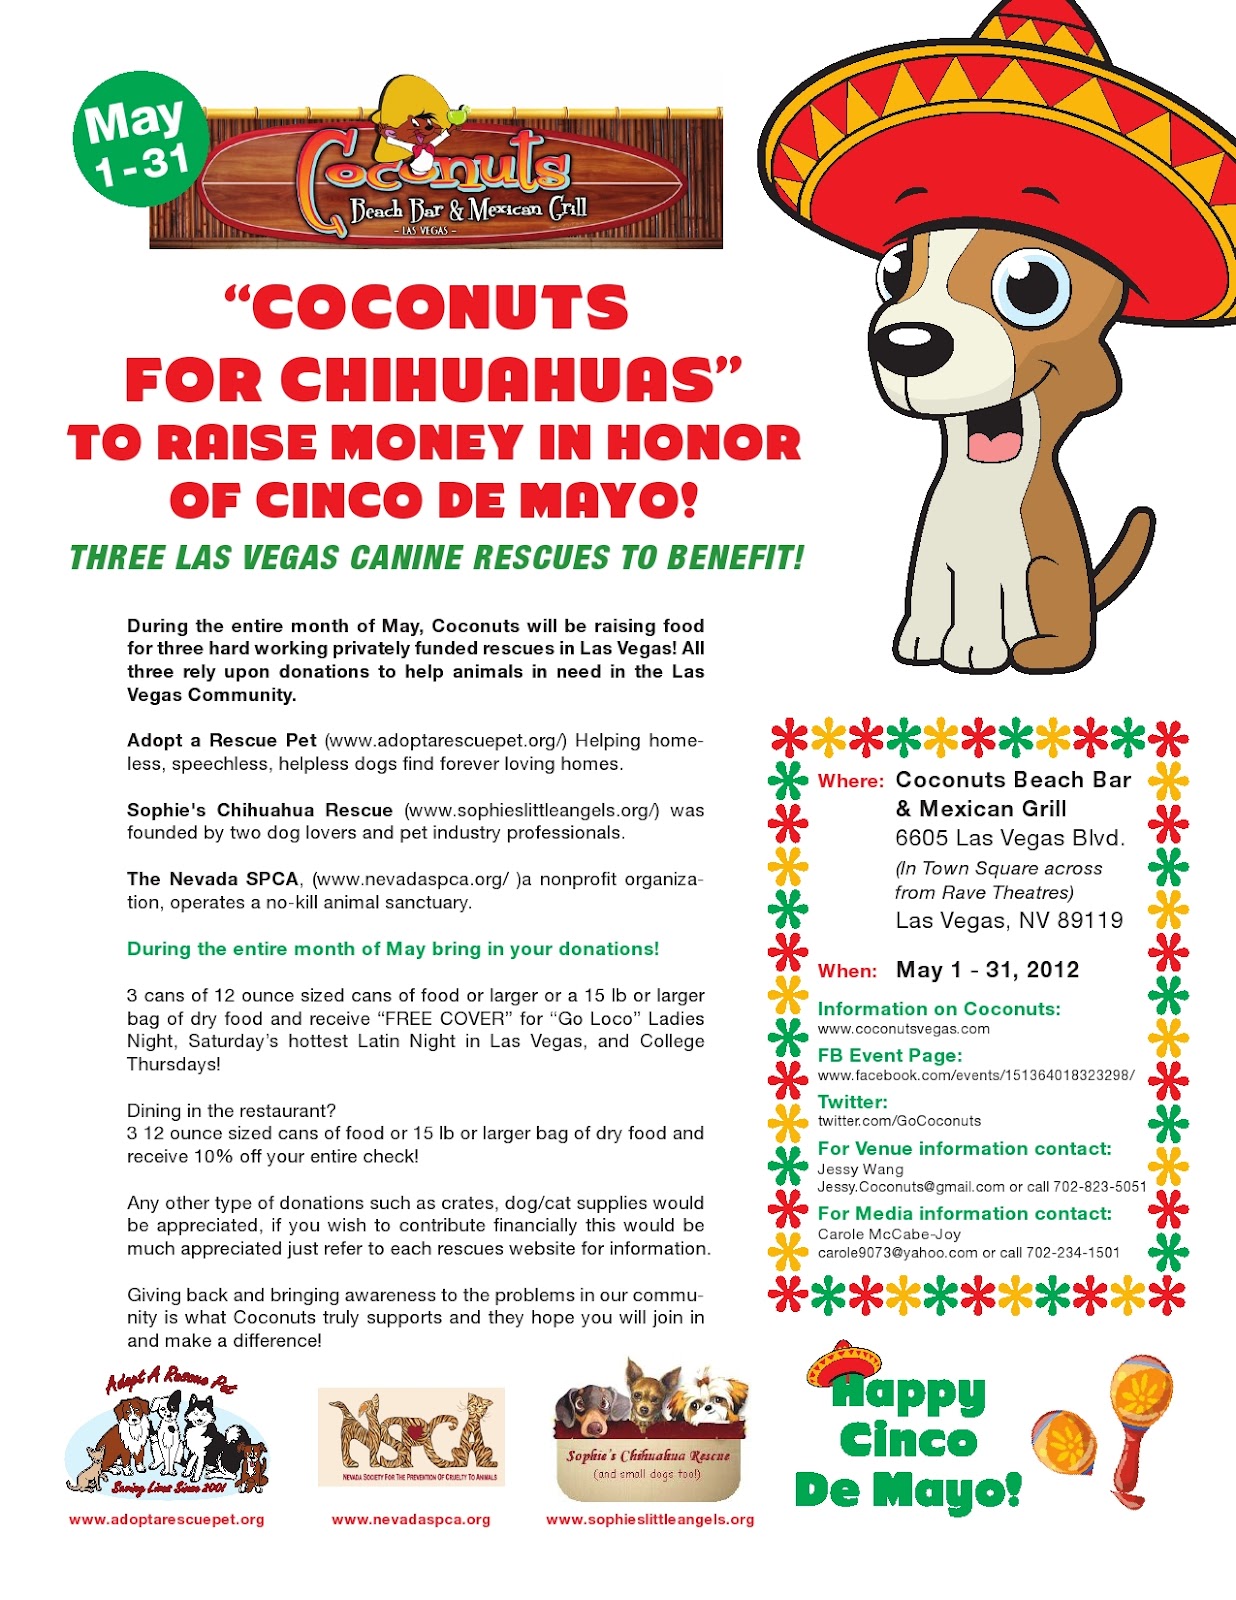 GOCOCONUTS FOR CHIHUAHUAS TO RAISE MONEY IN HONOR OF CINCO DE MAYO